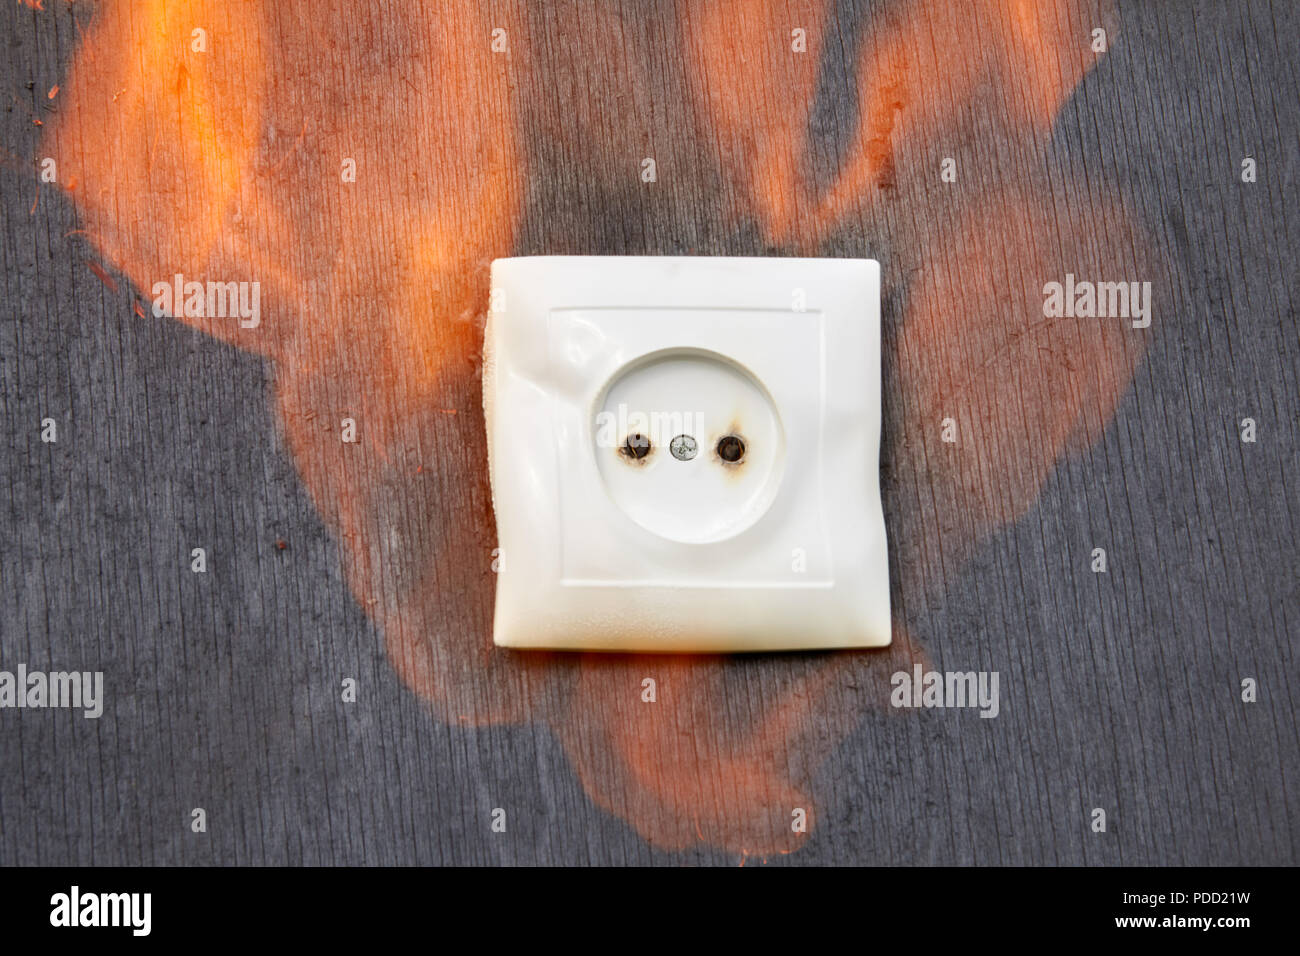 Household fire, Ignition of the plastic power socket. Stock Photo